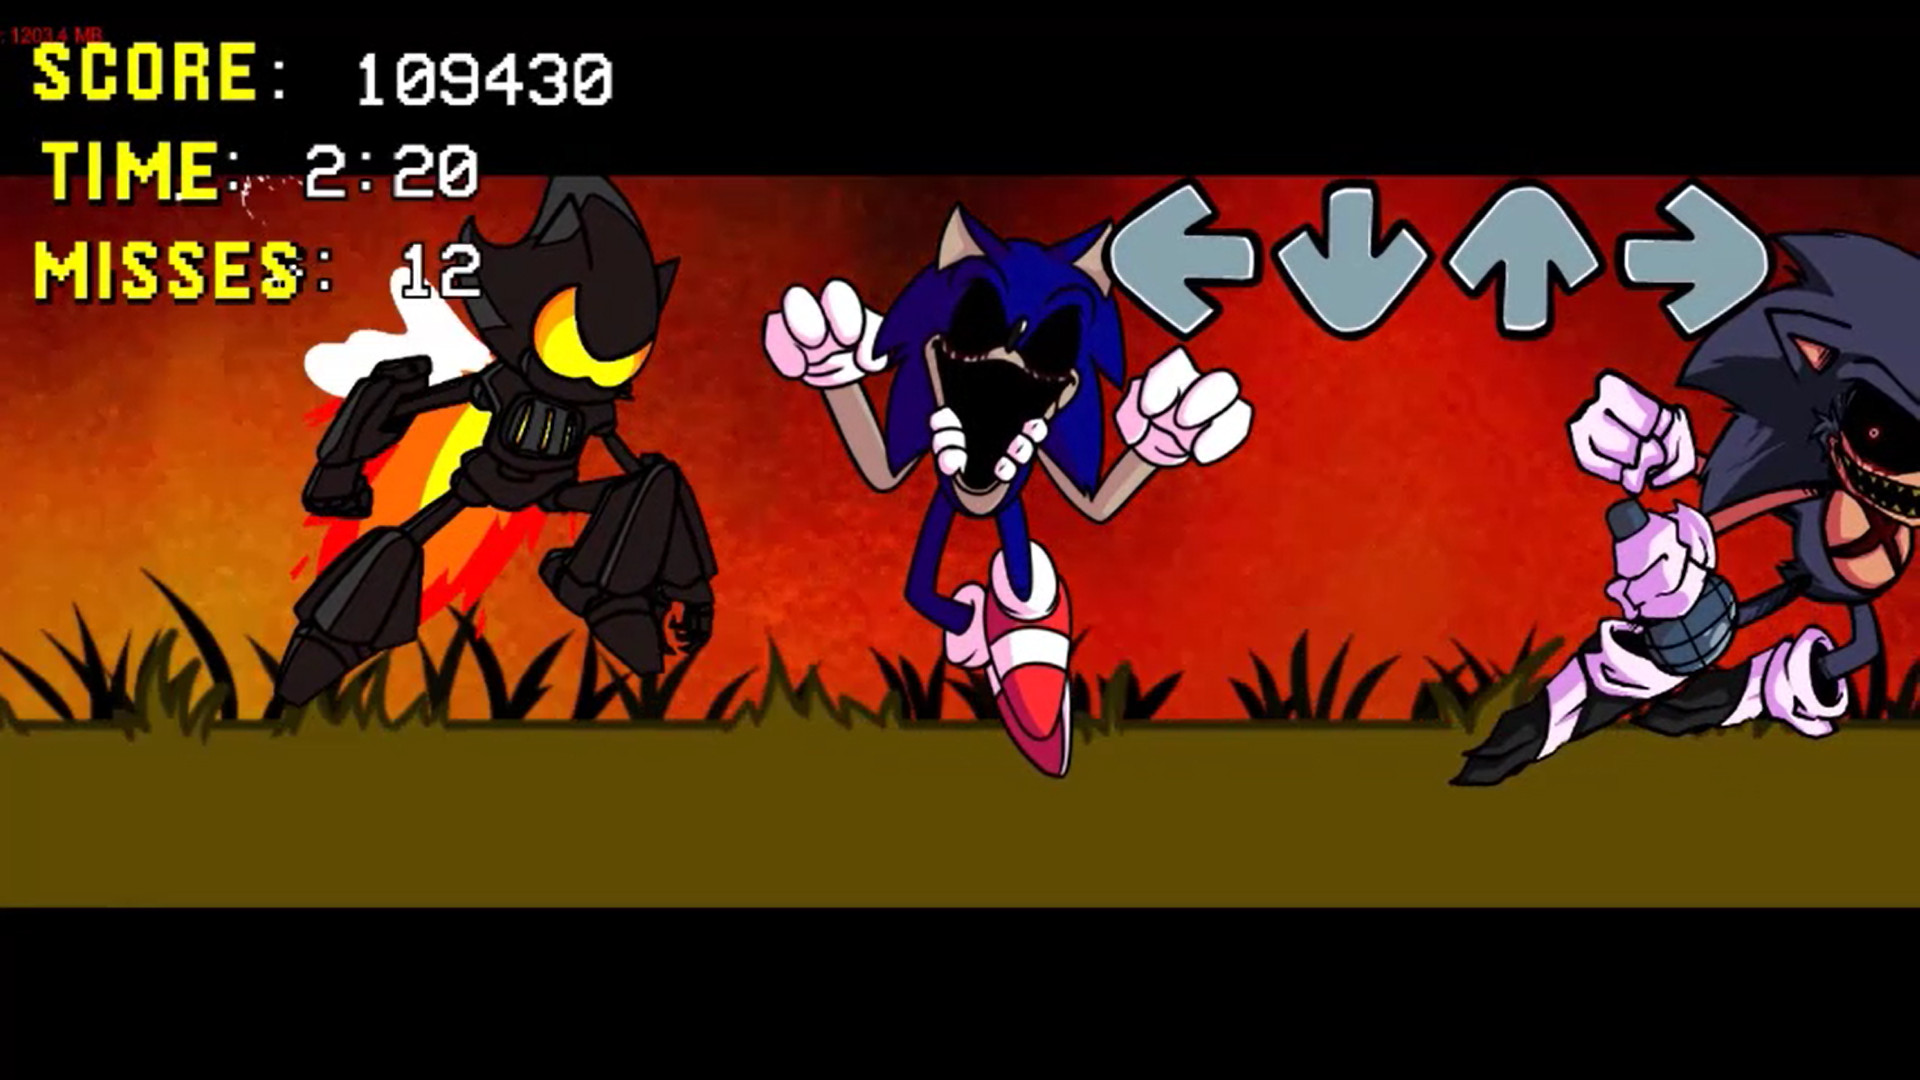 Login. prey furnace,fleetway,sonic.exe and lord x sing it. 